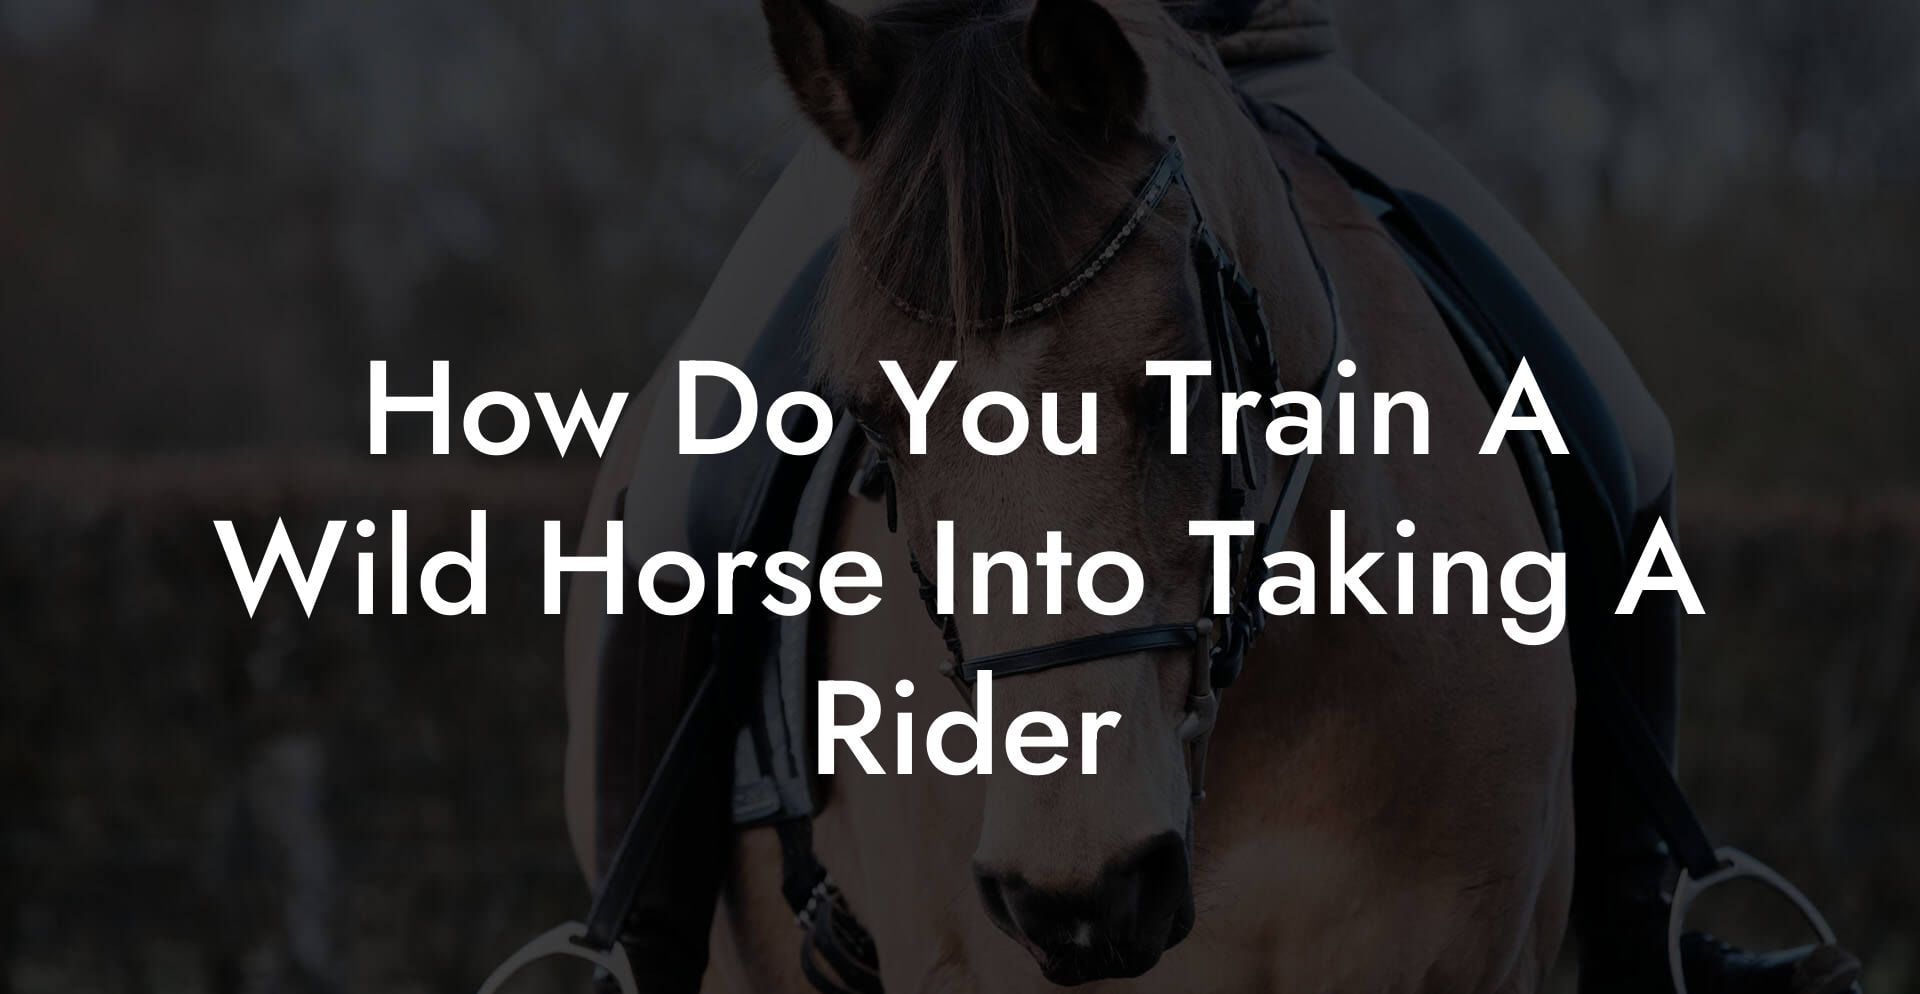 How Do You Train A Wild Horse Into Taking A Rider